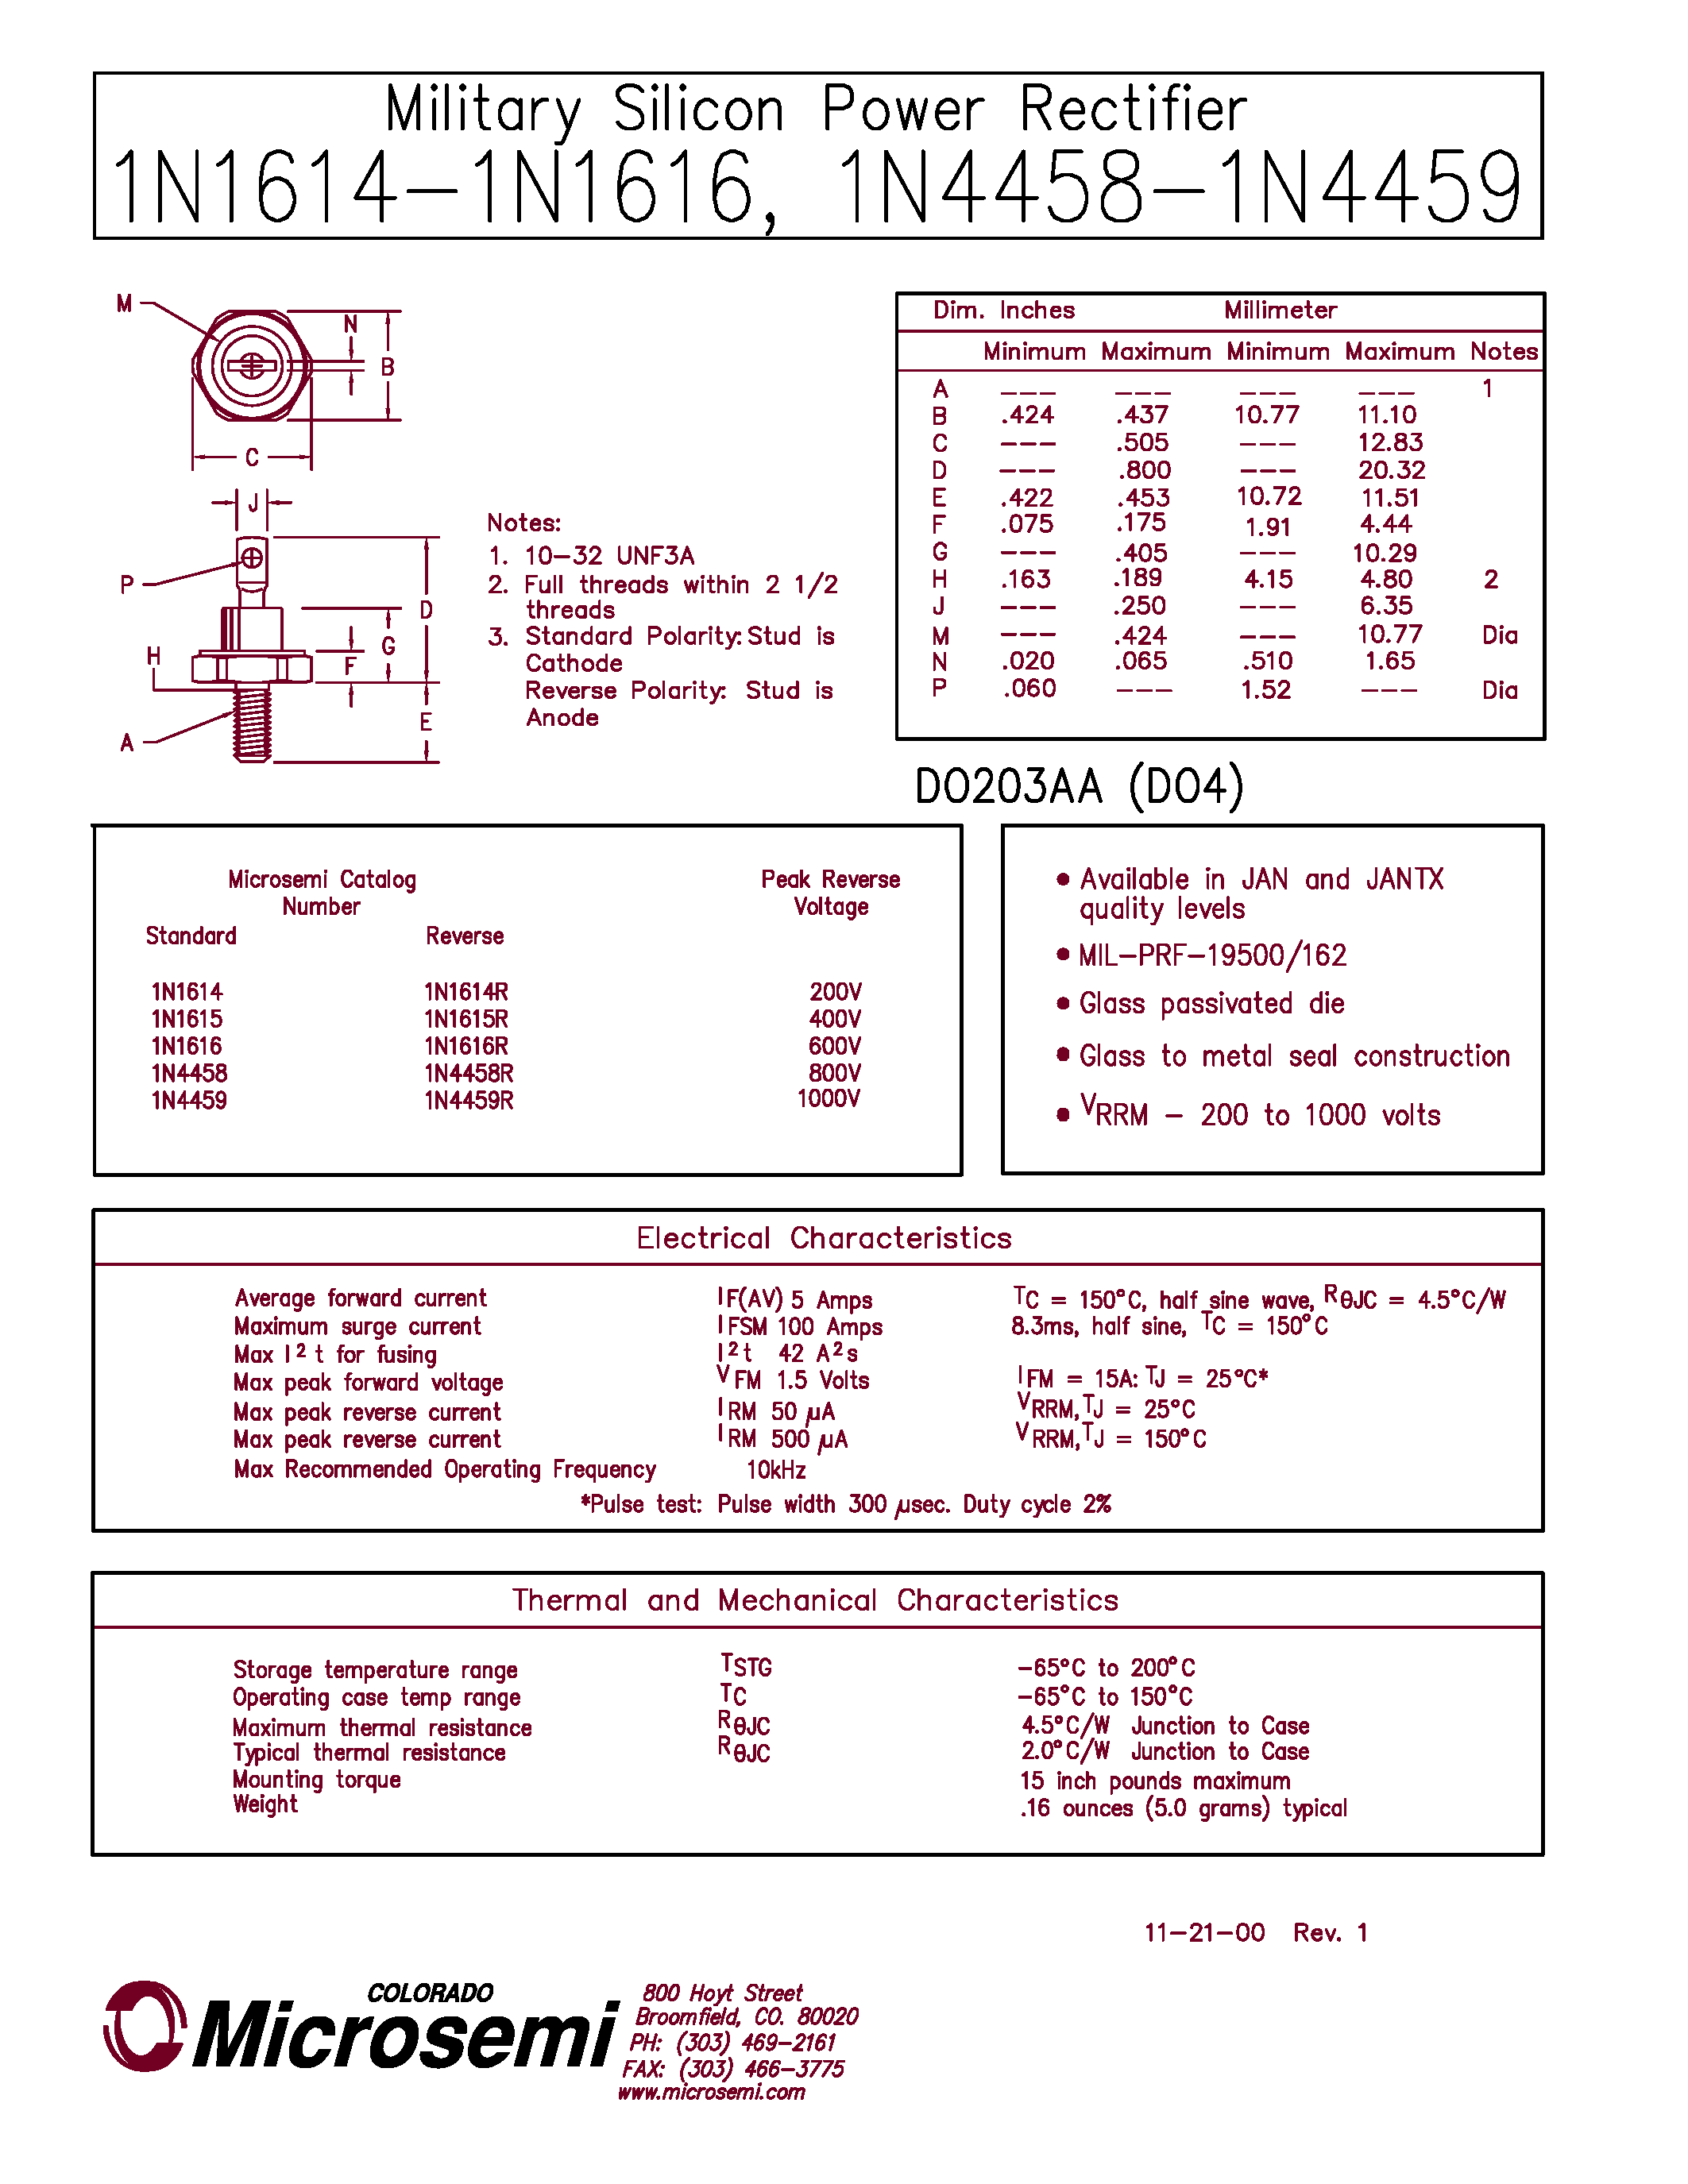 Datasheet 1N1616 - Military Silicon Power Rectifier page 1